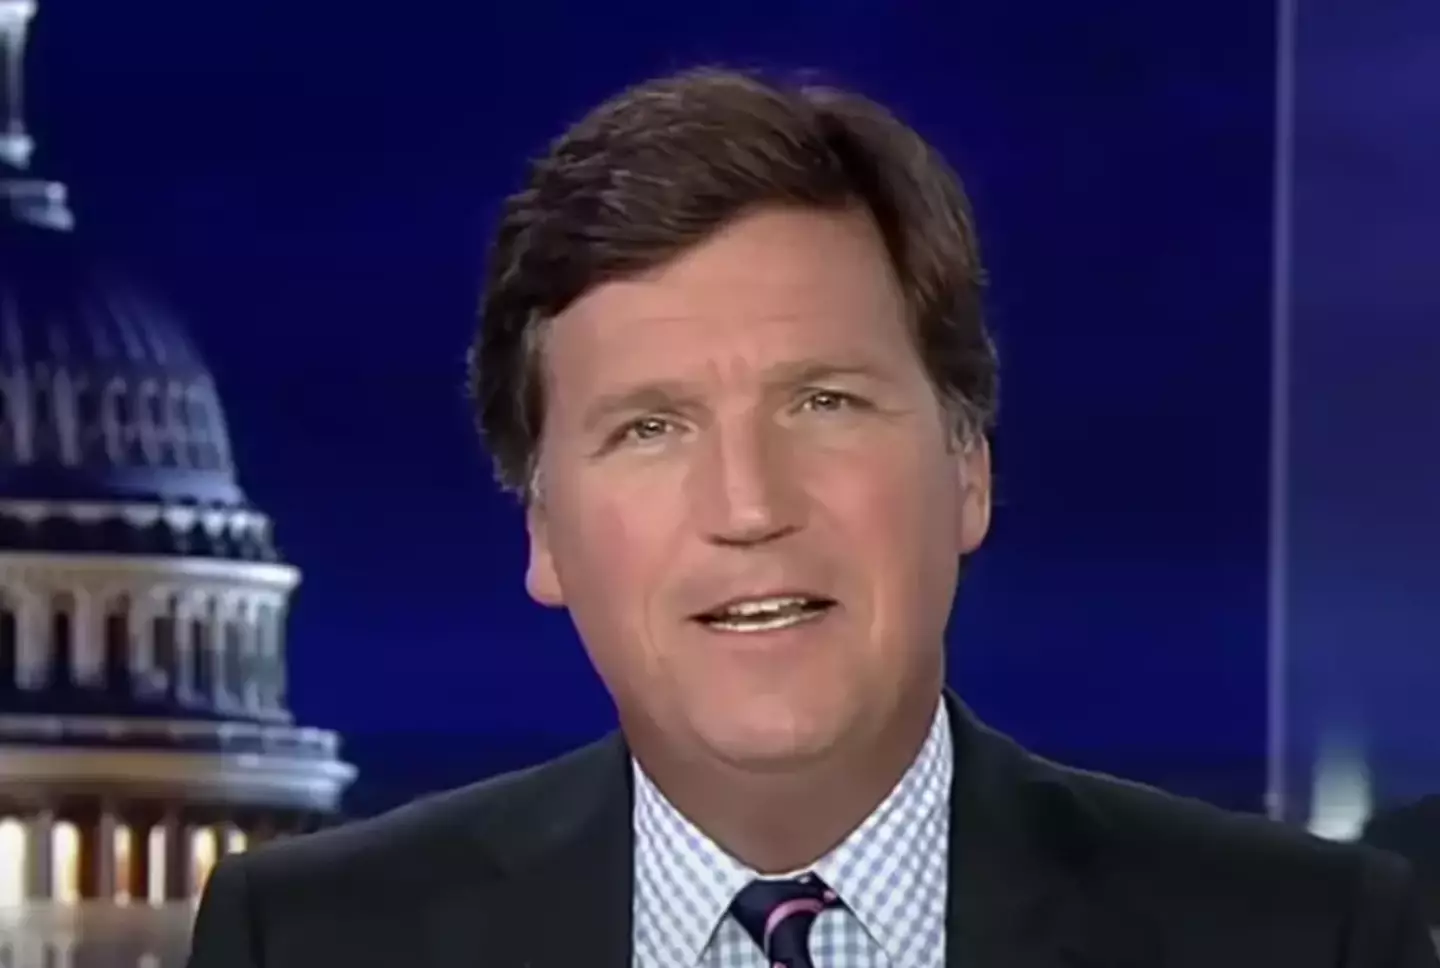 Carlson has said some pretty controversial things during his time at Fox News.